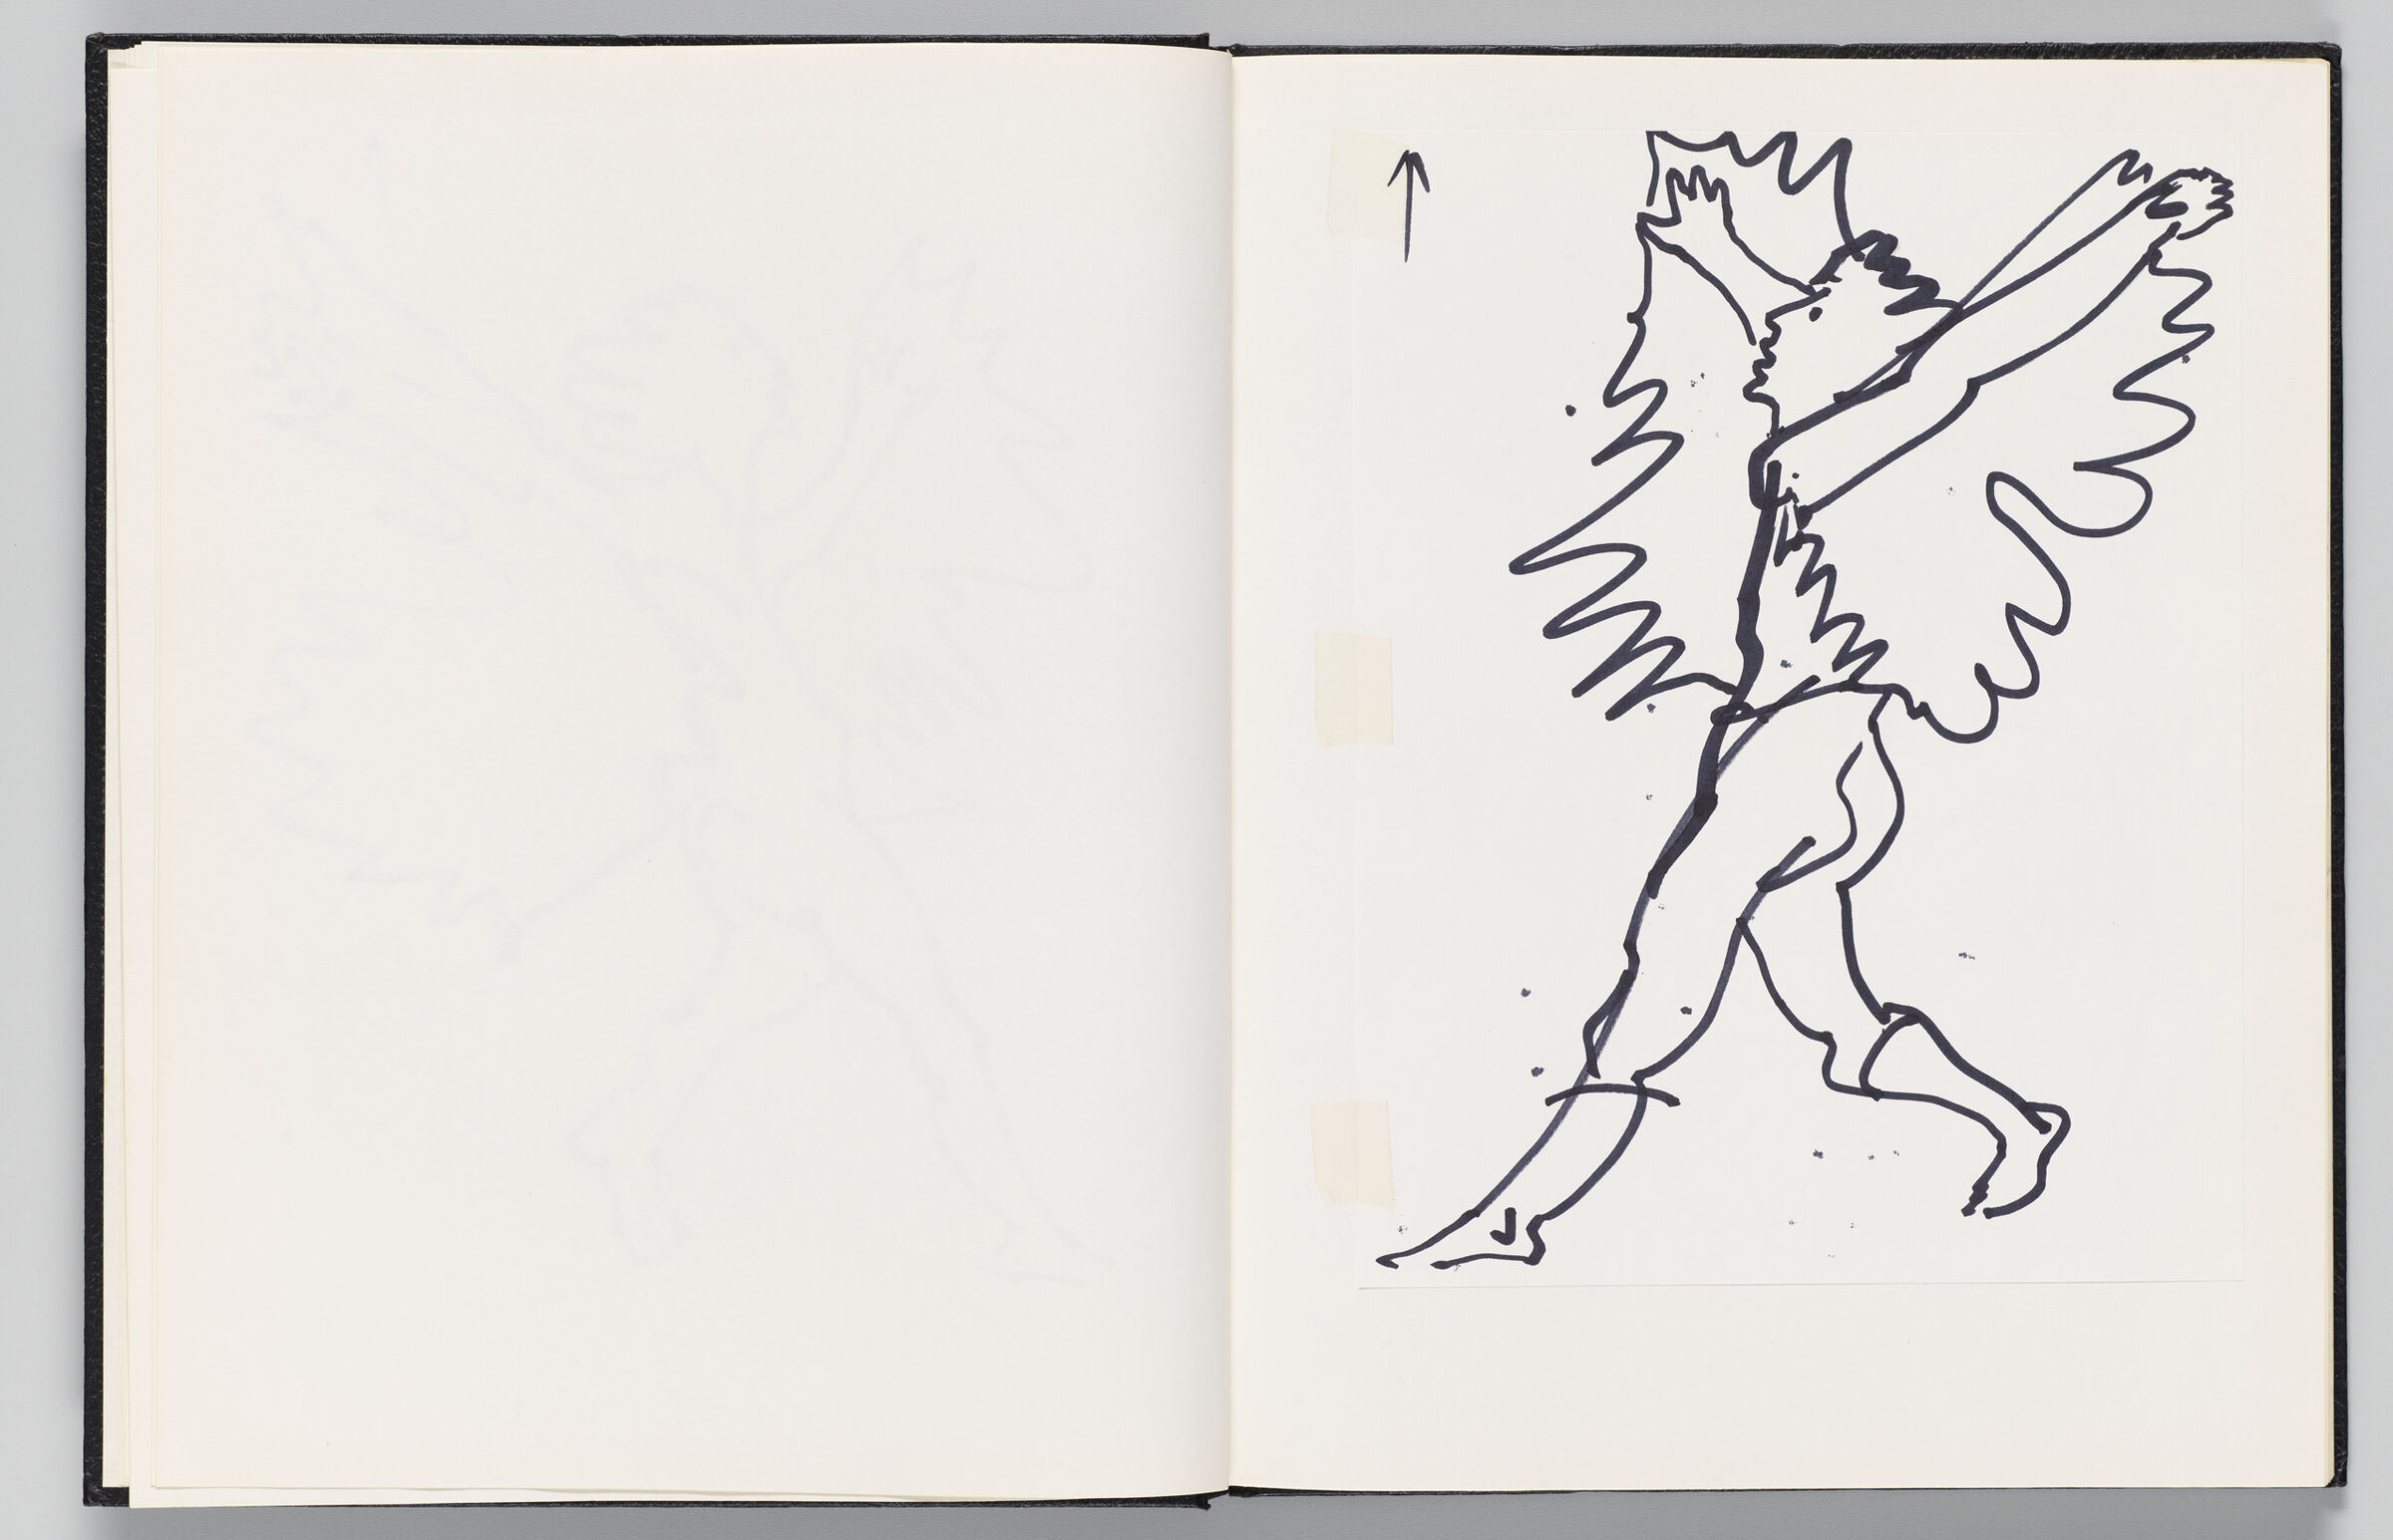 Untitled (Blank, Left Page); Untitled (Adhered Icarus Sketch, Right Page)